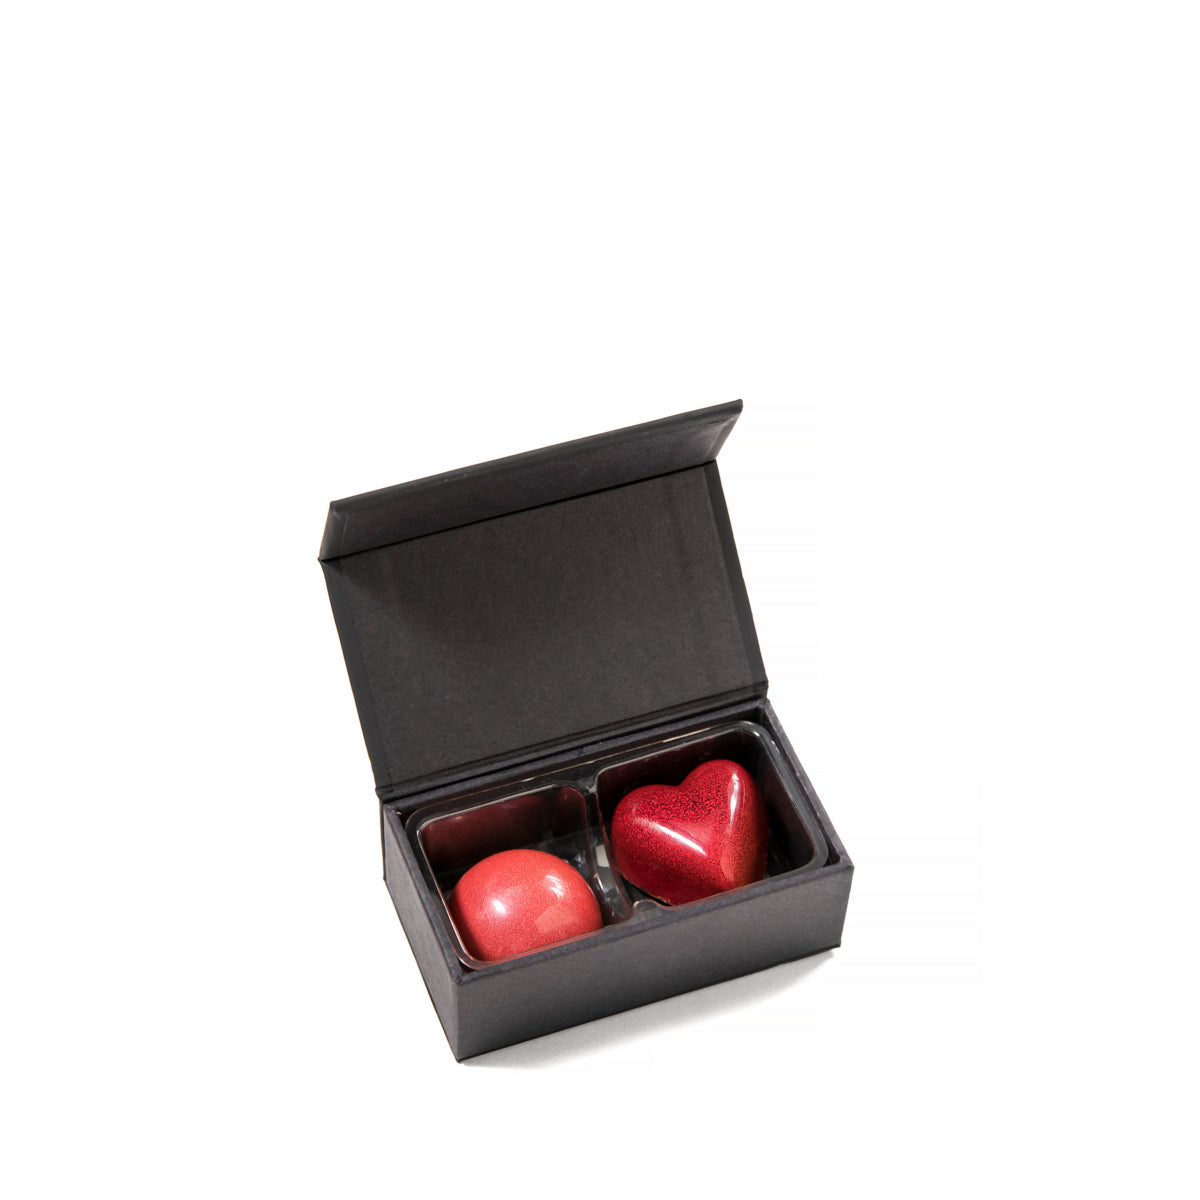 A two-piece collection of Feve chocolates, in a luxury box. Great for wedding chocolates, party favors, hotel chocolates, fine dining chocolates, and other luxury uses.